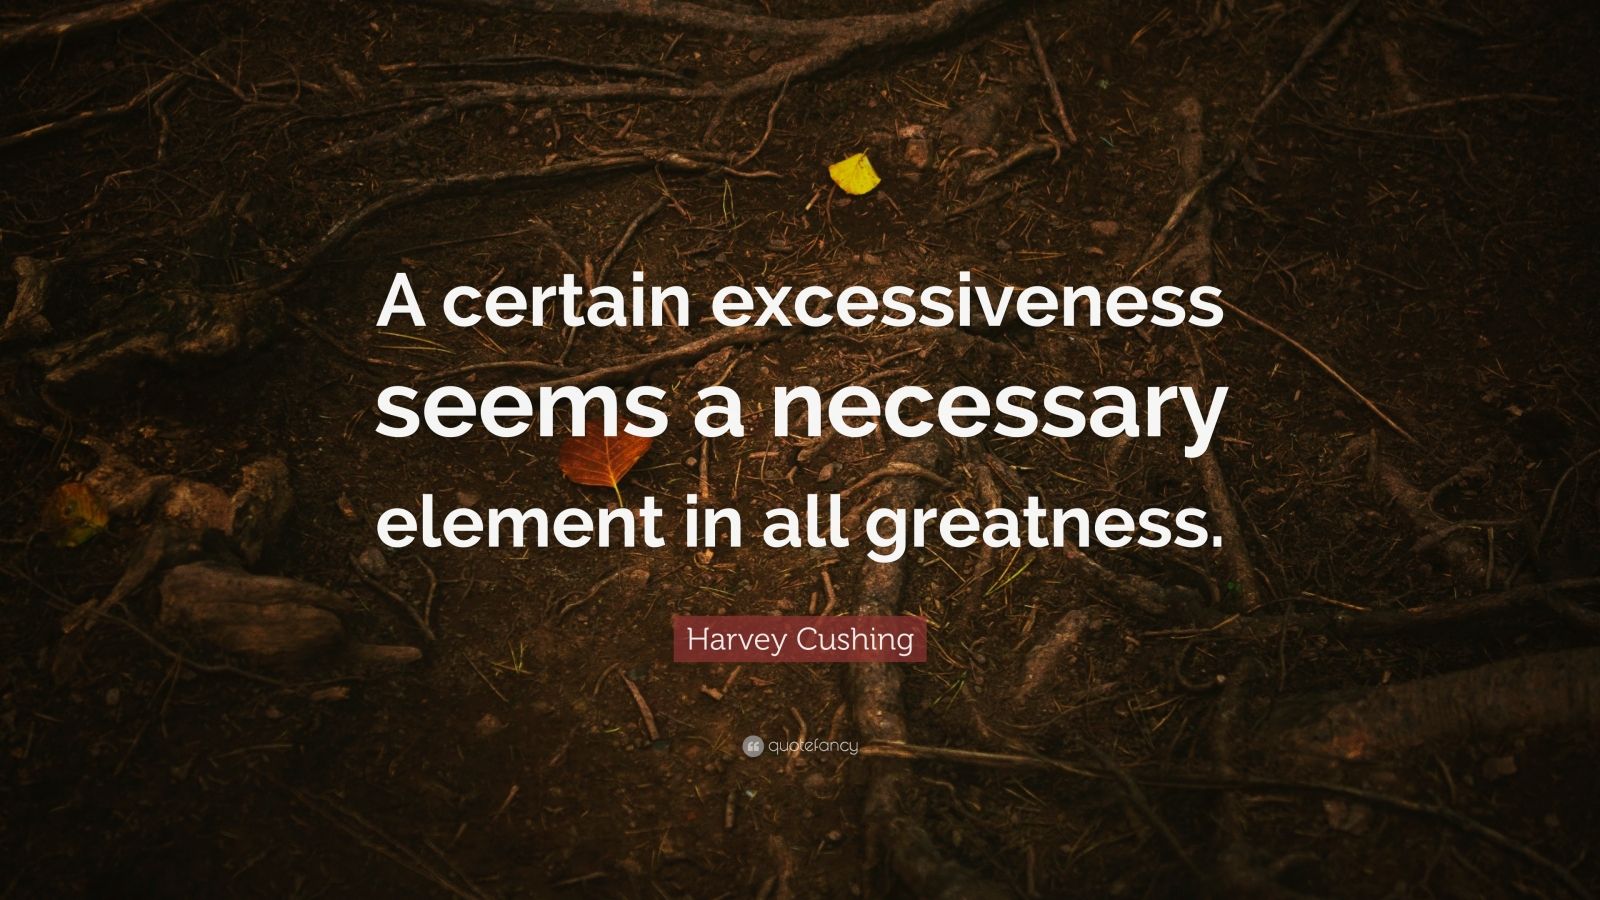 Harvey Cushing Quote: “A certain excessiveness seems a necessary